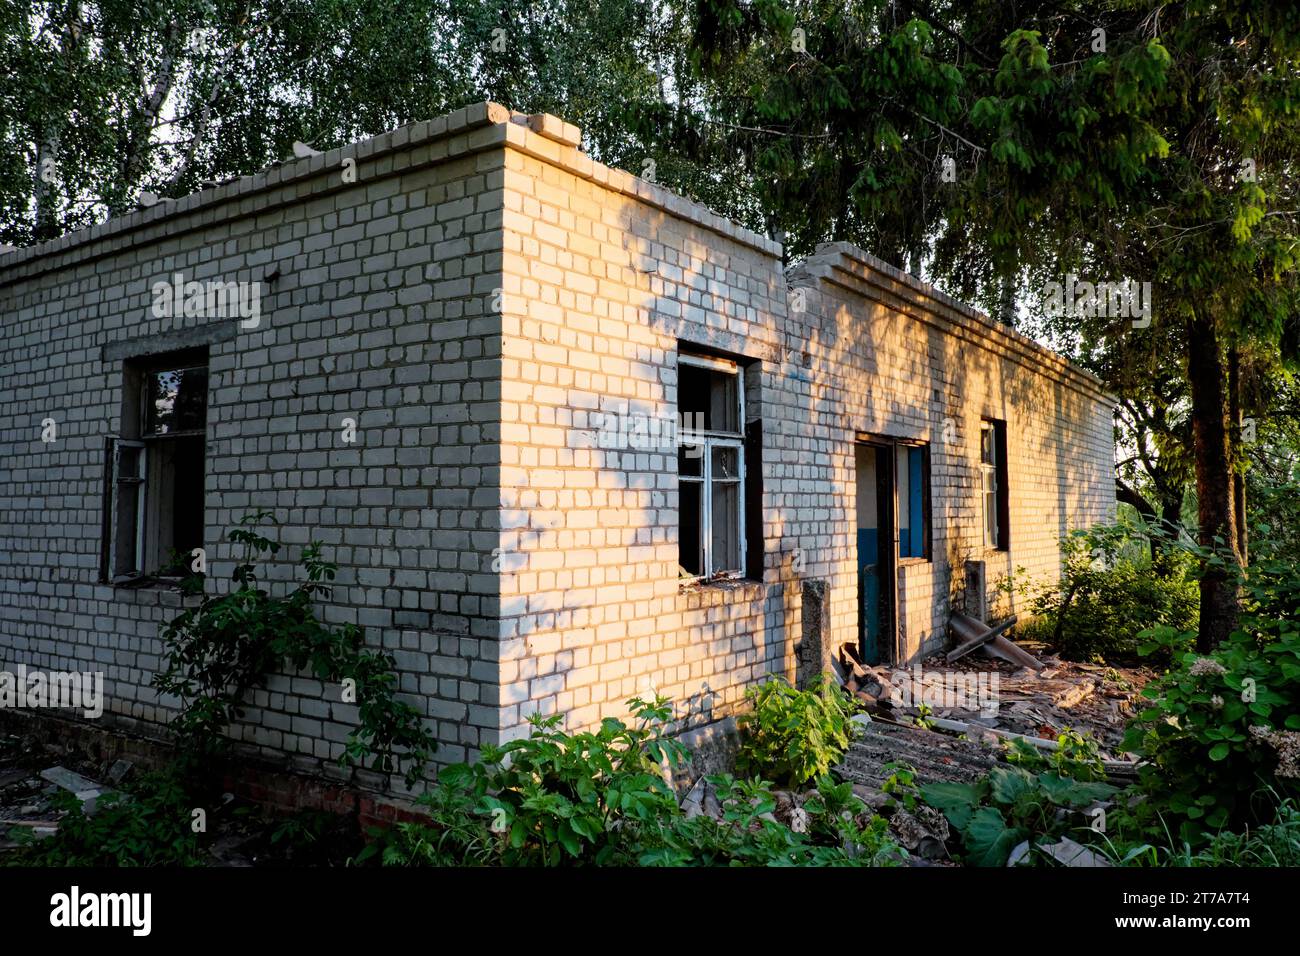 An abandoned brick building with broken windows and overgrown vegetation. Stock Photo